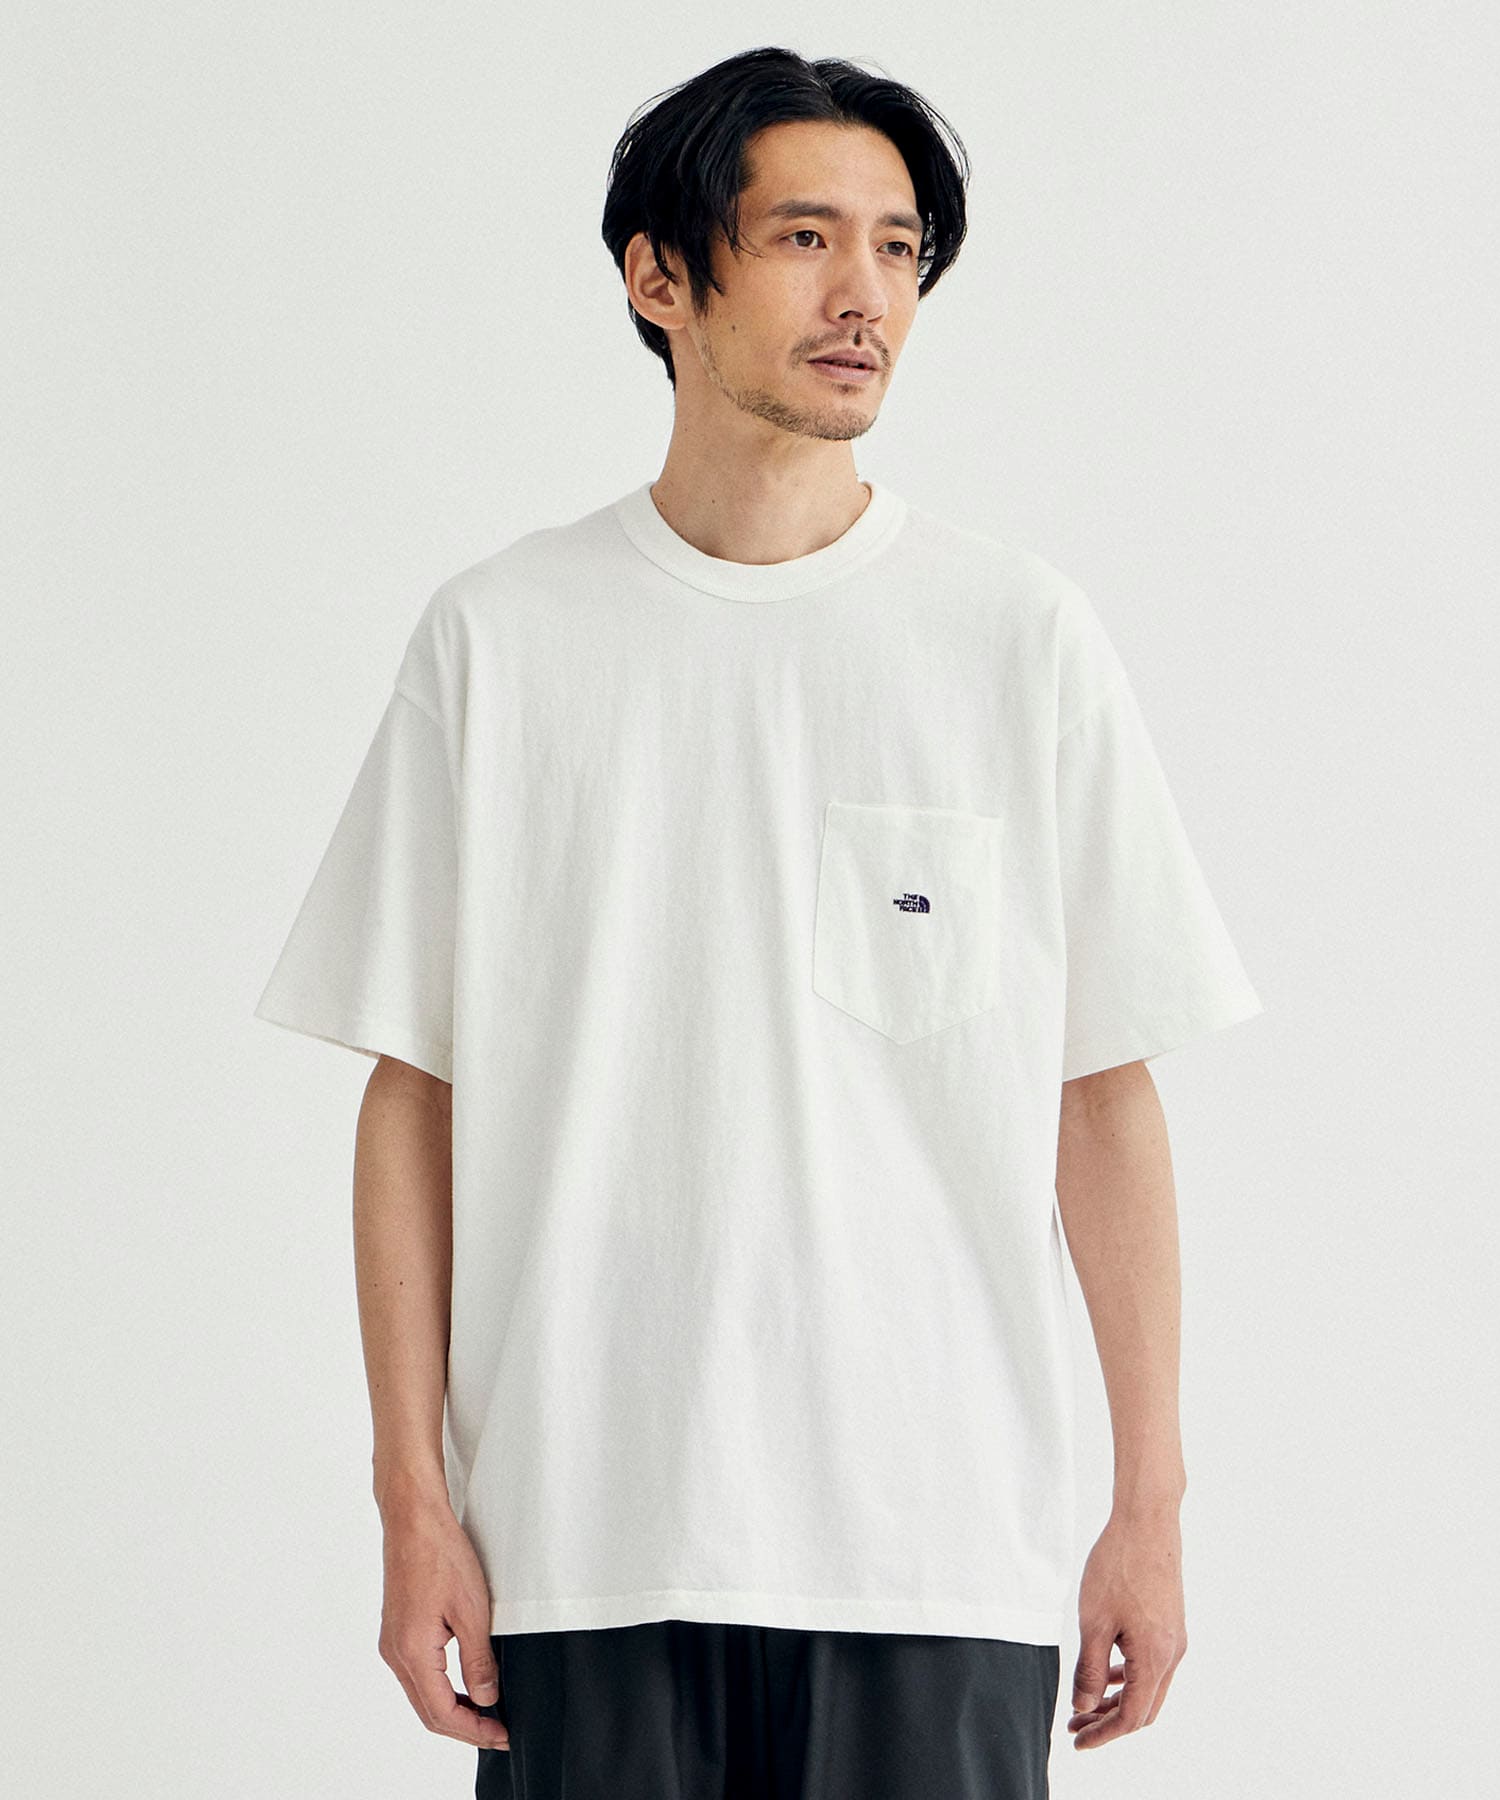 7oz Pocket Tee | THE NORTH FACE PURPLE LABEL